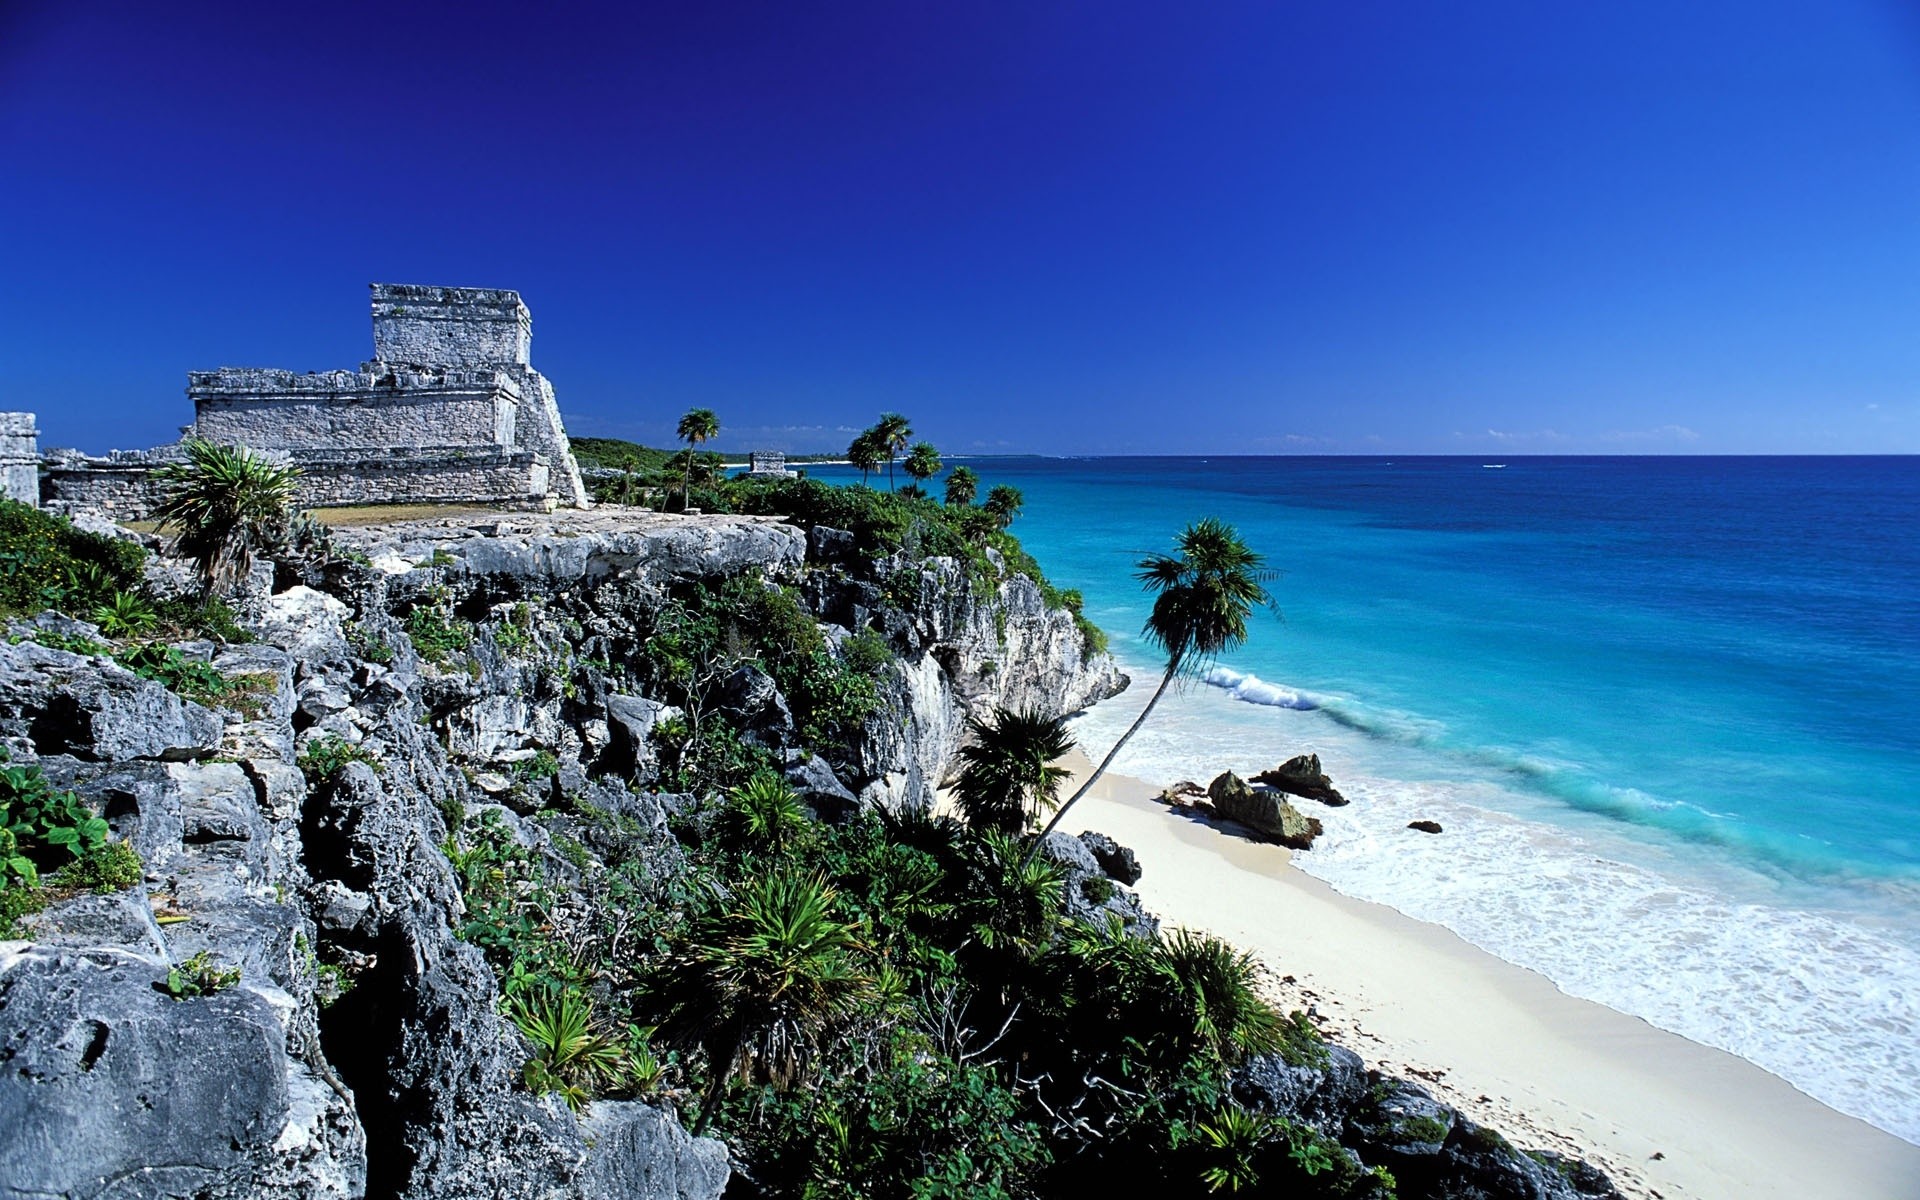 other city seashore travel sea water sky beach ocean island rock summer landscape nature outdoors vacation seascape tropical tourism scenic bay mayan ruins history